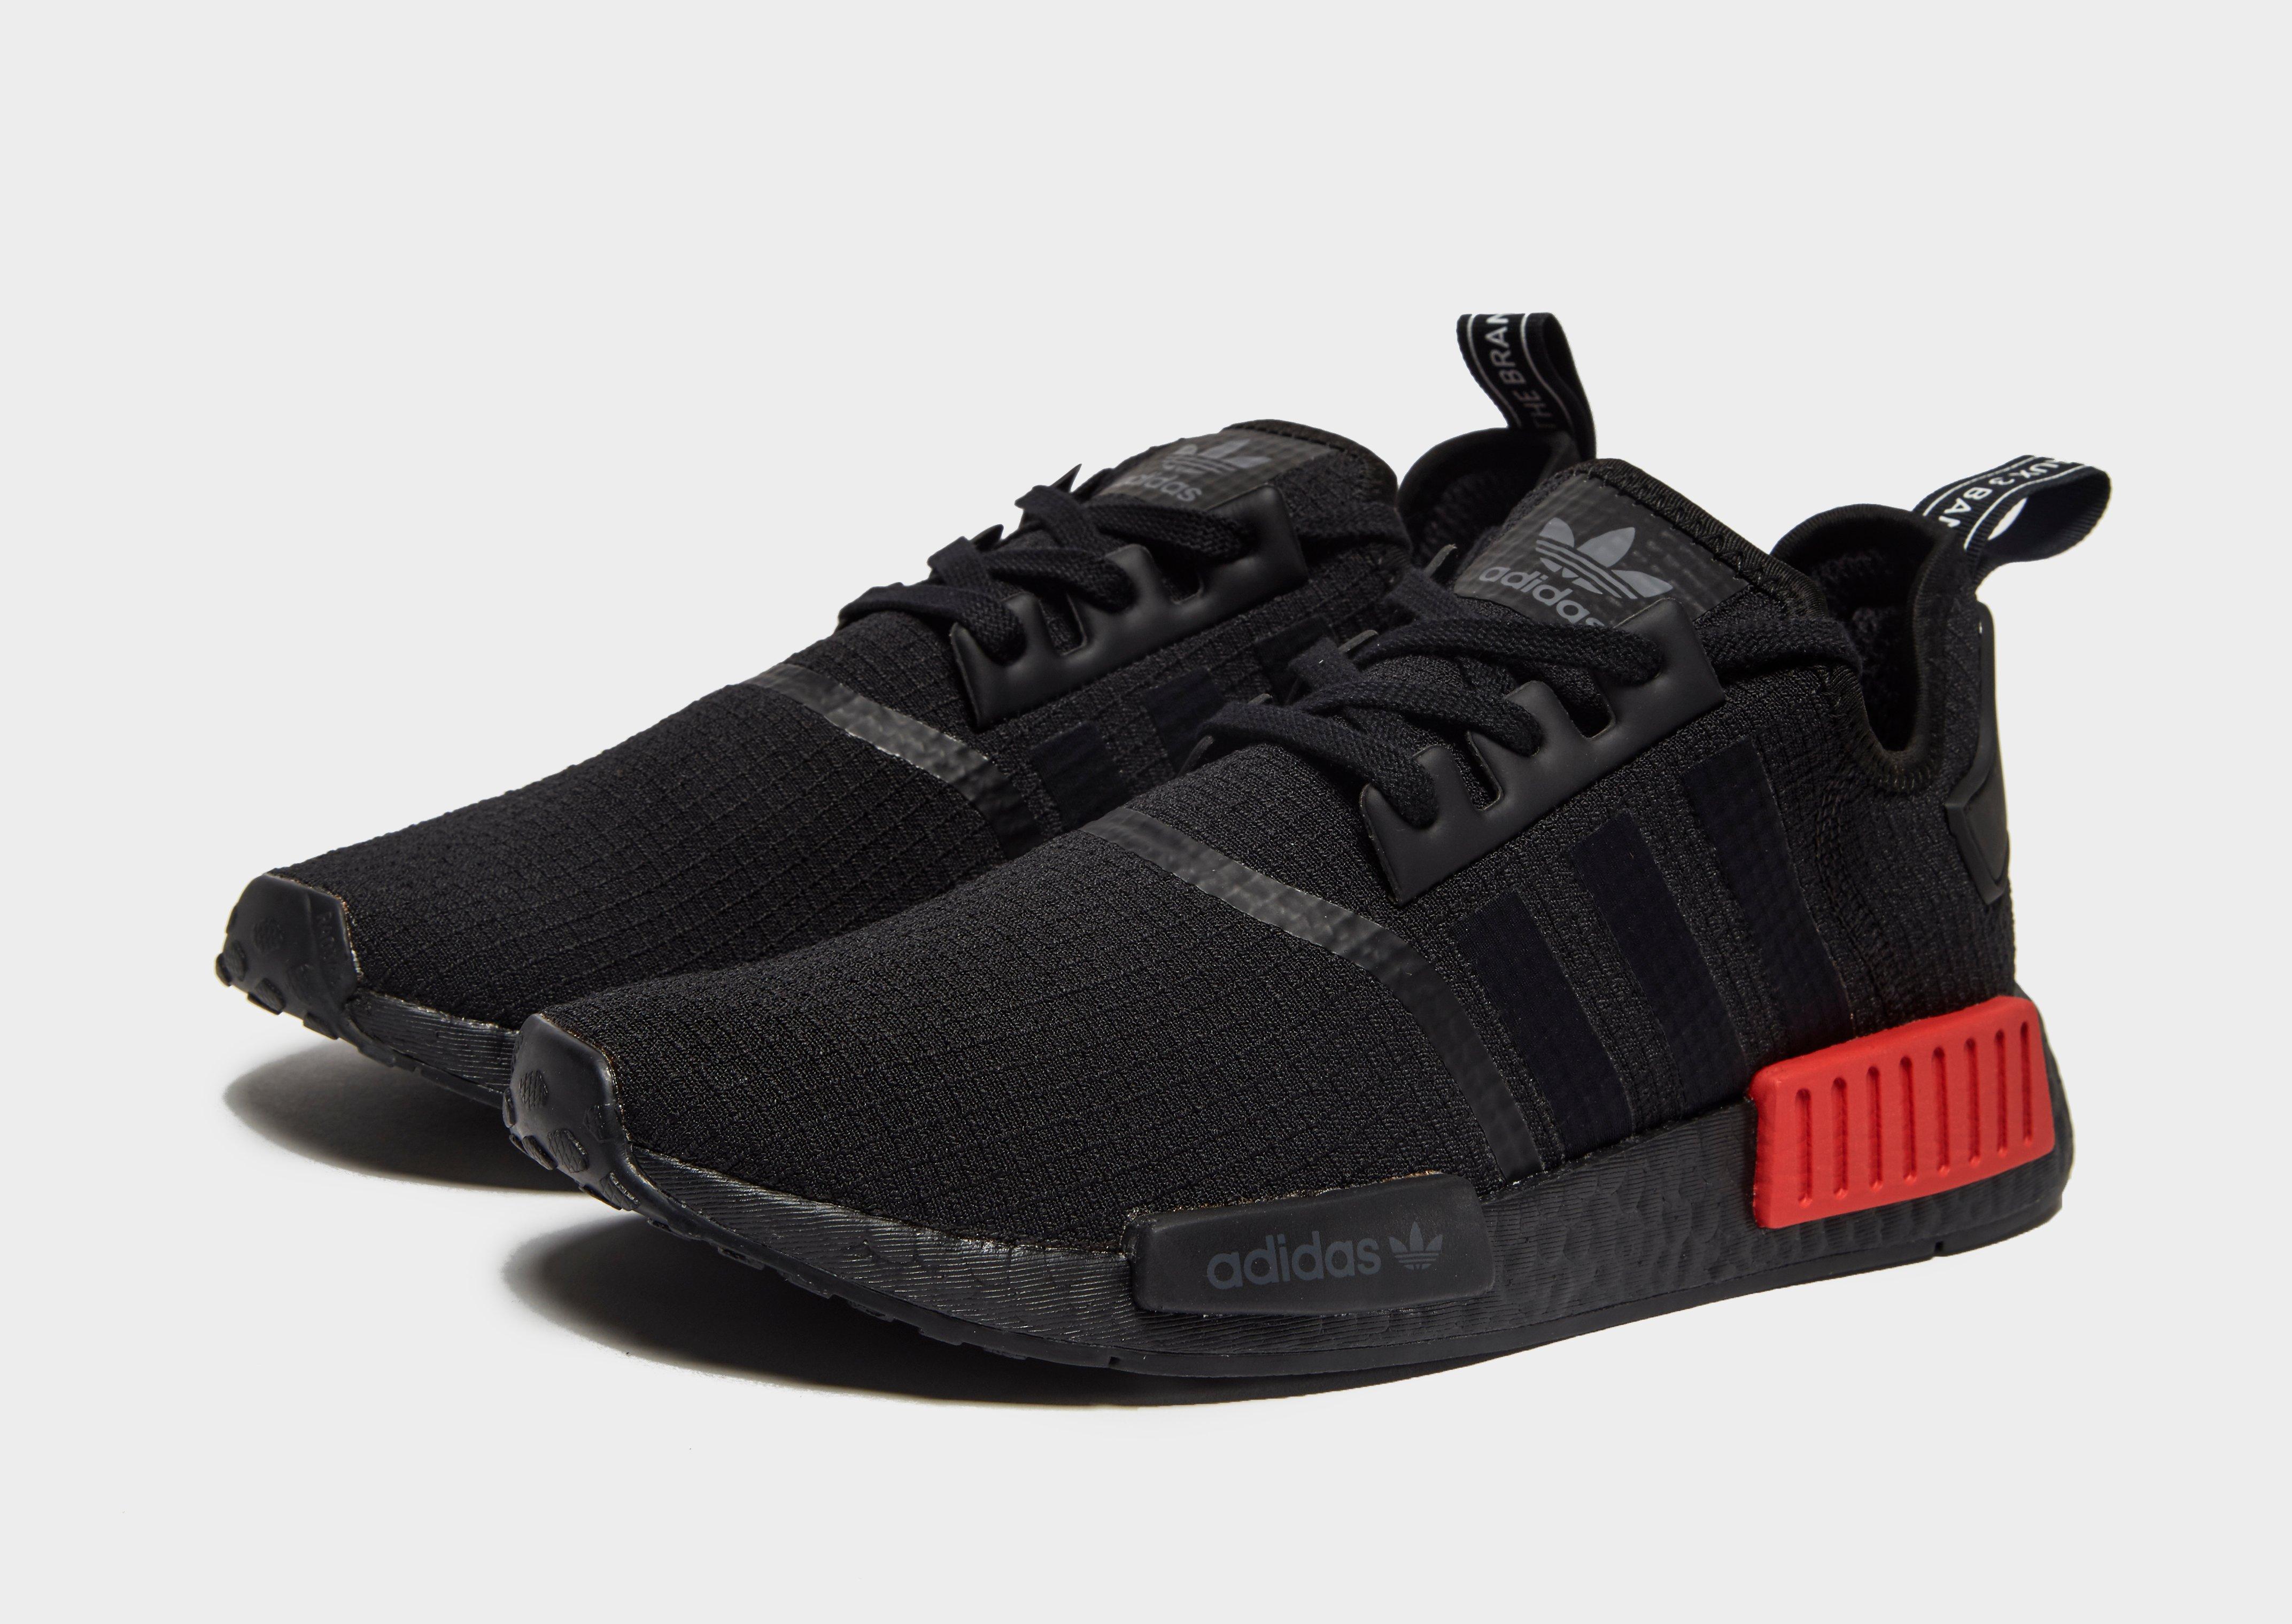  adidas  Nmd  r1 Shoes in Black for Men  Lyst